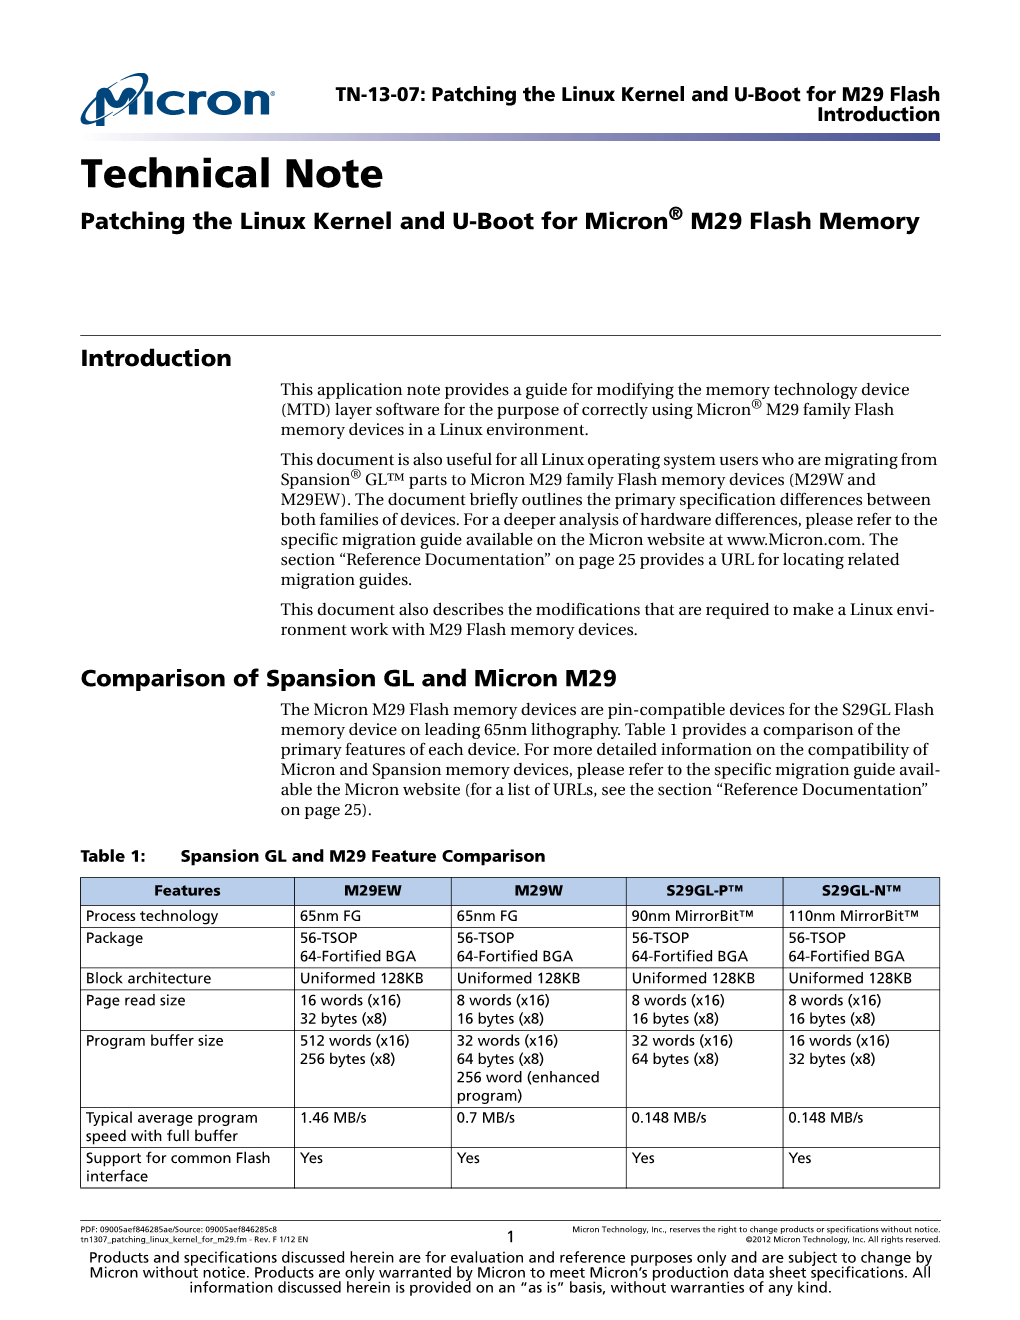 Patching the Linux Kernel and U-Boot for Micron® M29 Flash Memory